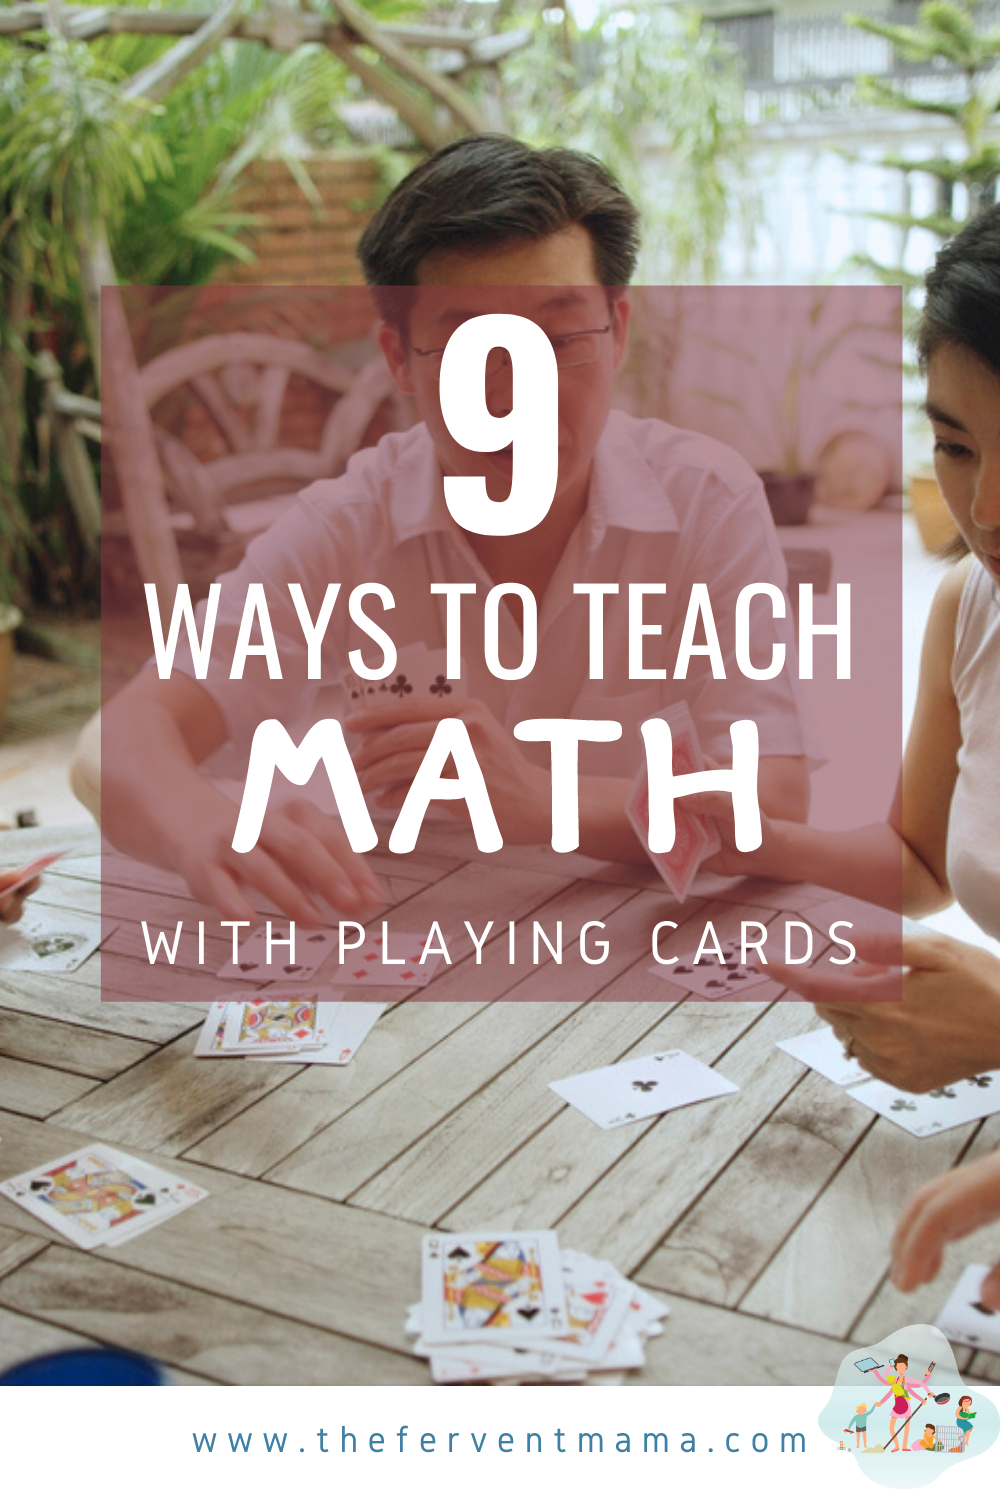 Asian family playing cards outdoors with text overlay "9 Ways to teach Math with Playing Cards"